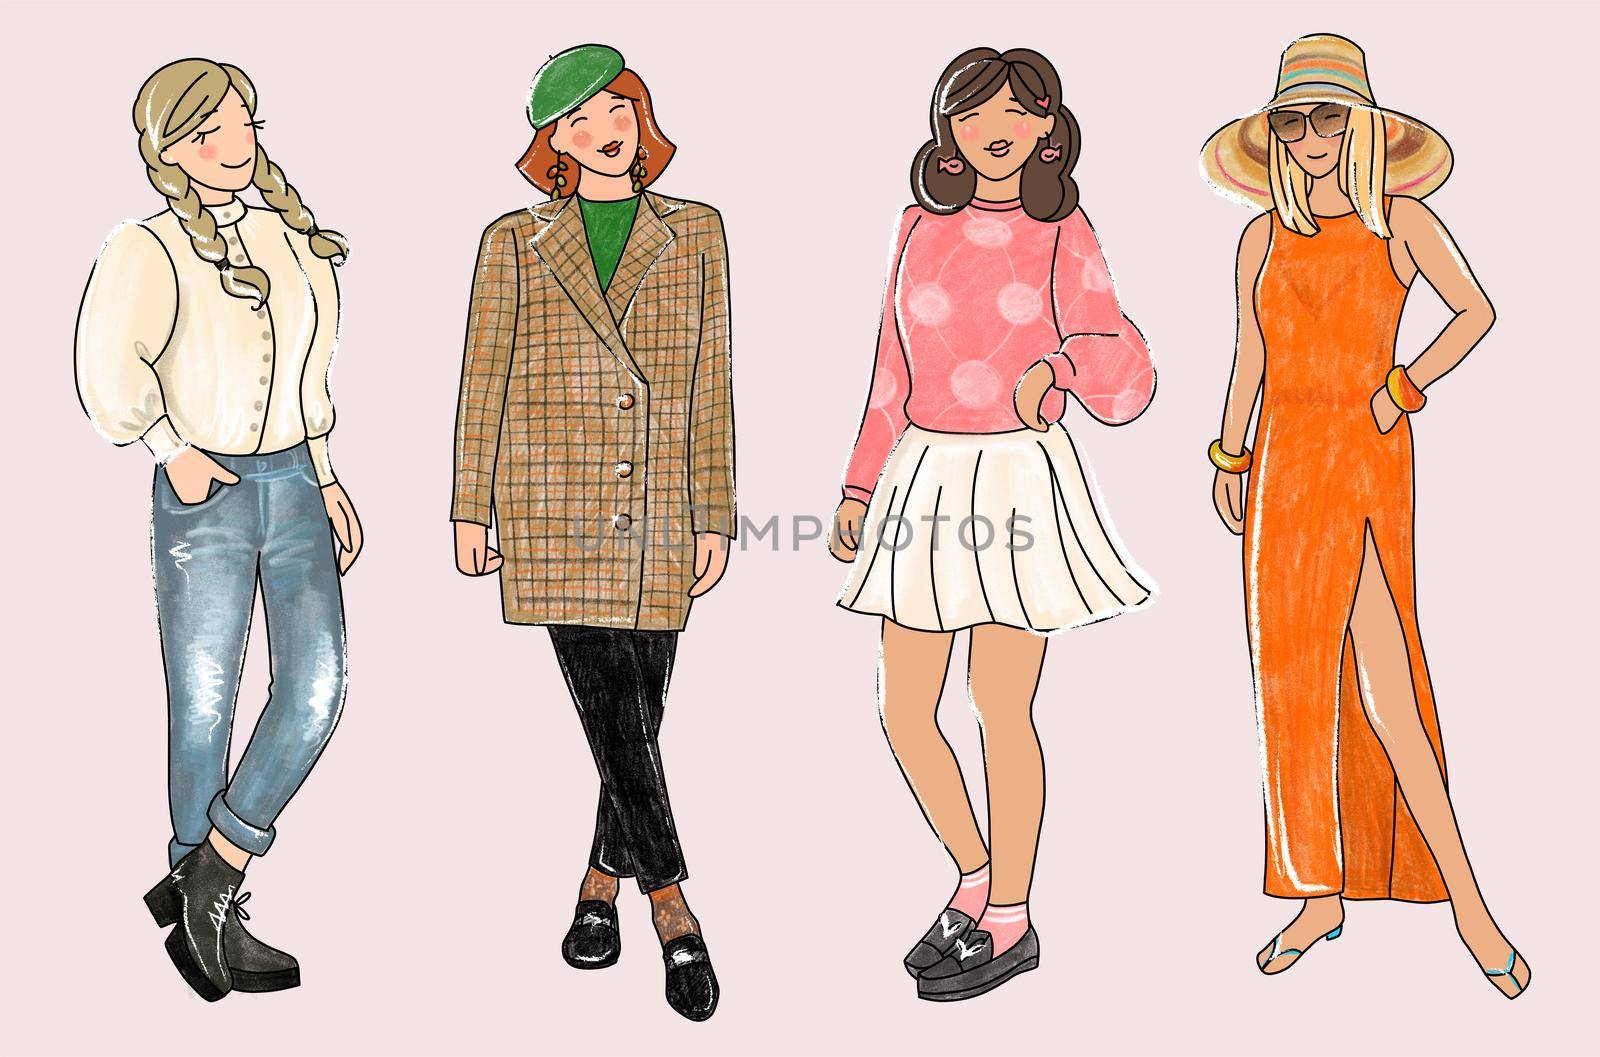 A set of girls in fashionable images. Illustration in the style of a sketch by hand. by Manka